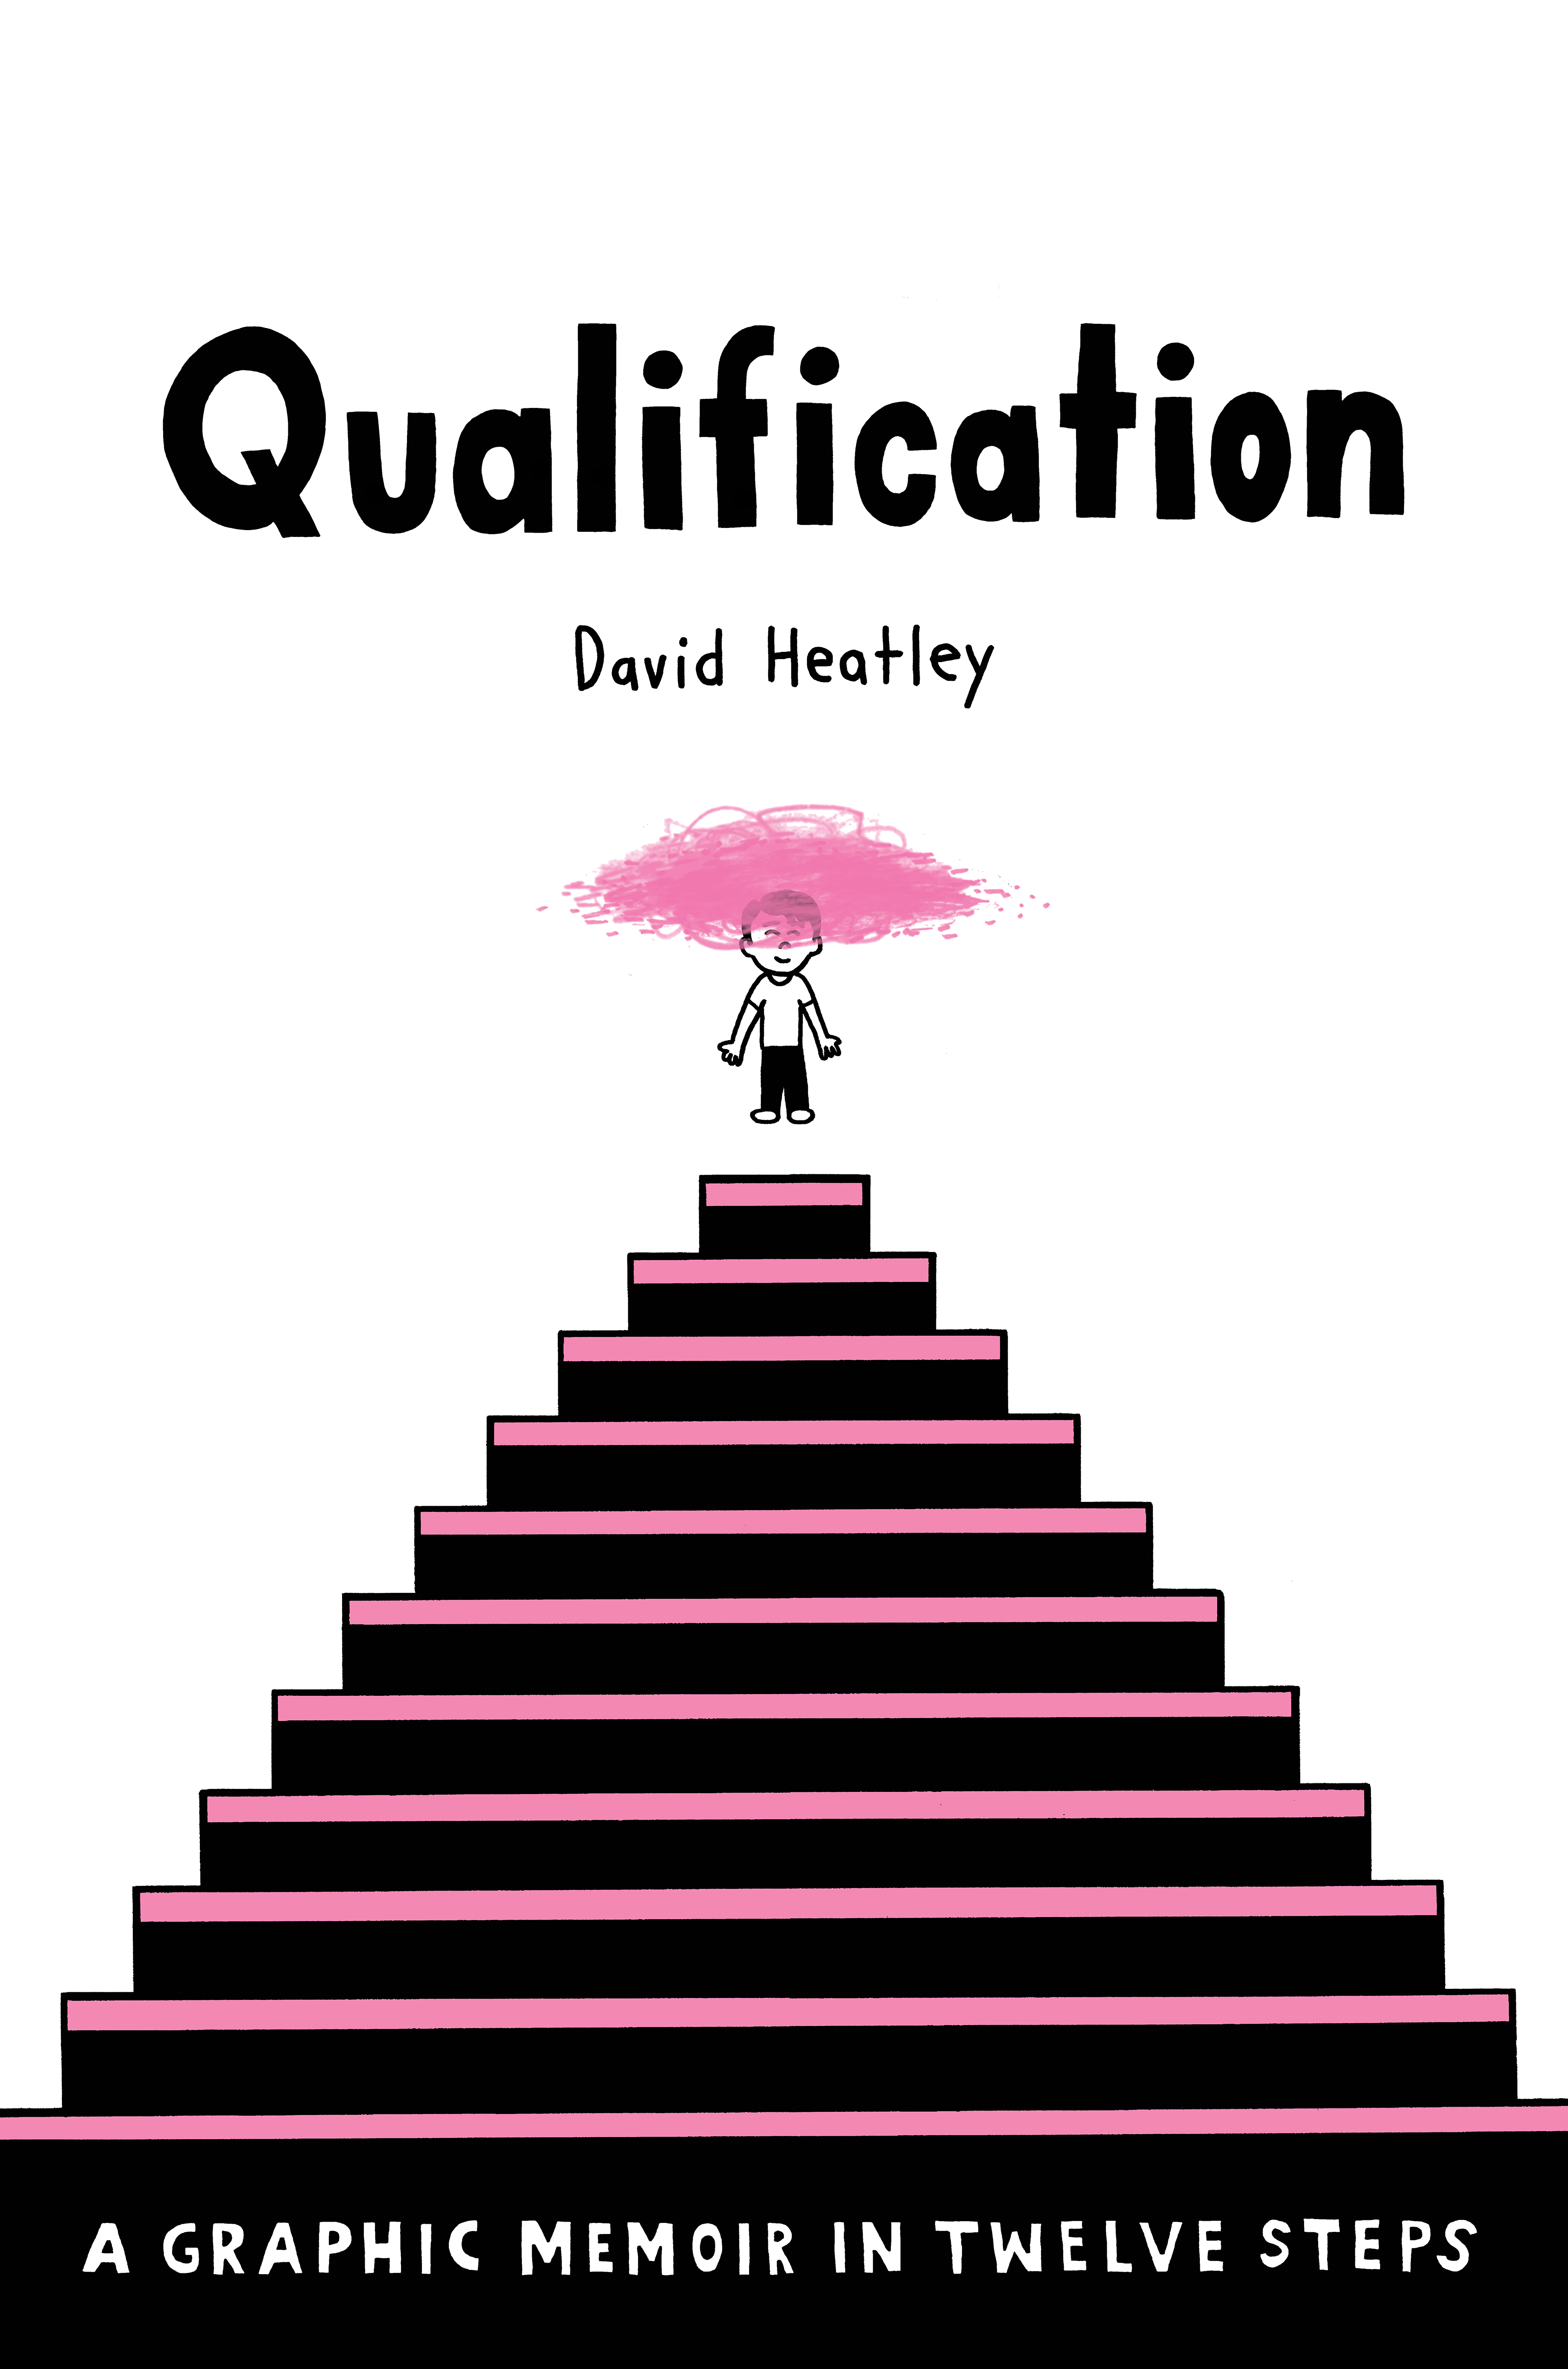 Book Launch: Qualification by David Heatley in conversation with Liana Finck